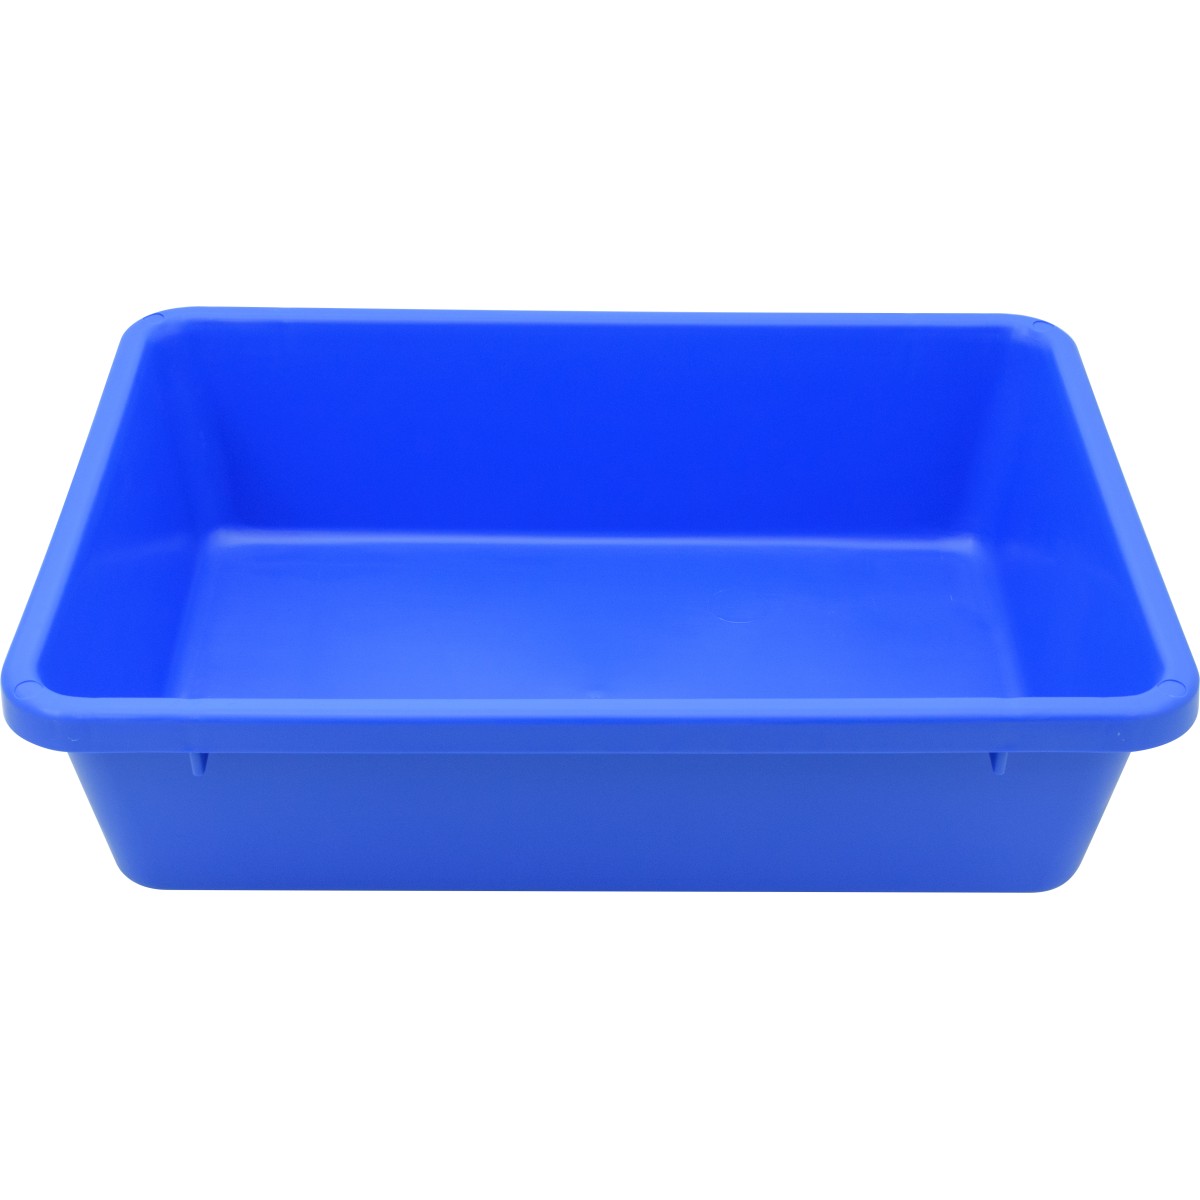 TRAY NESTING TOTE 22ltr BLUE No.5